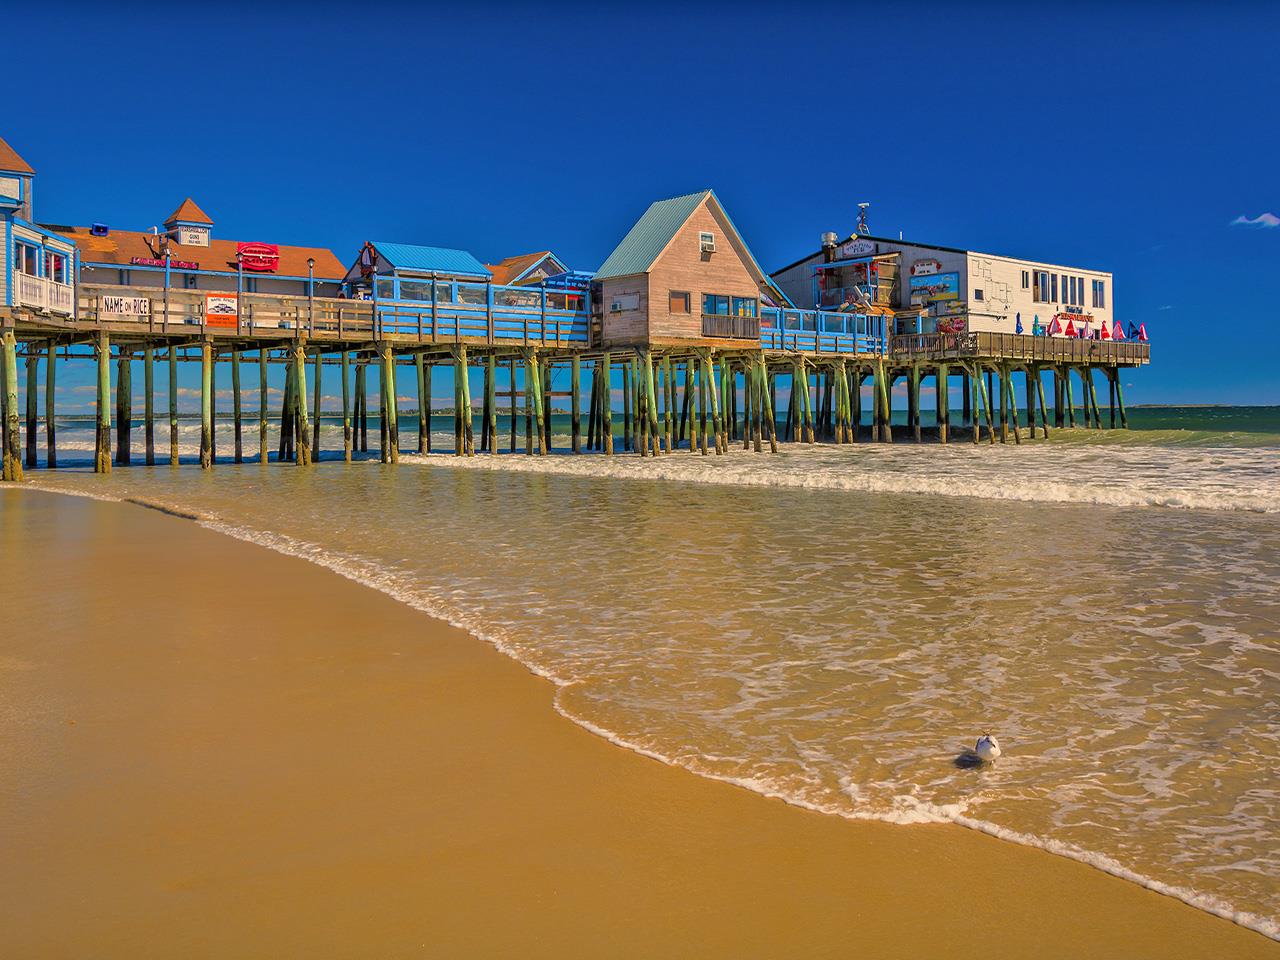 Interesting Things to Do in Old Orchard Beach